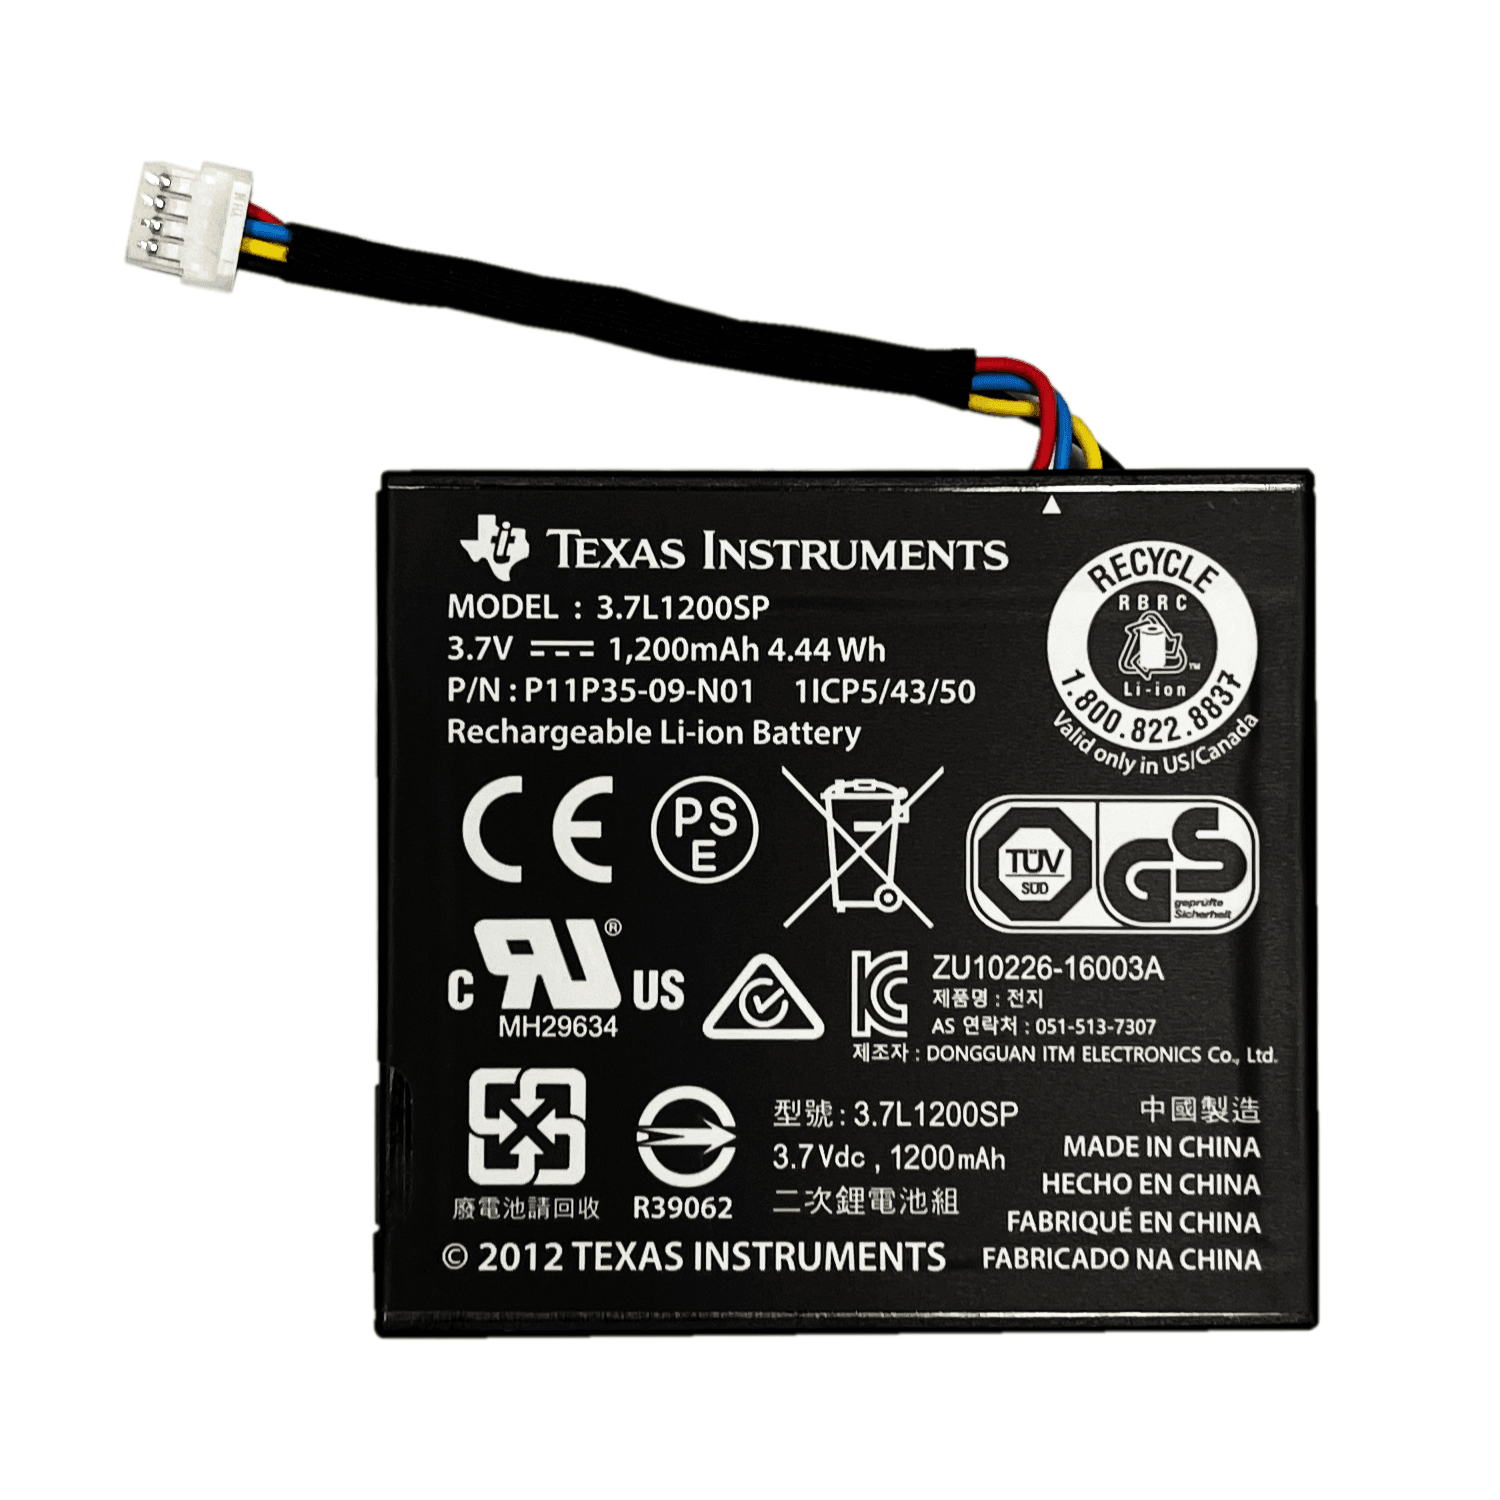 TI Rechargeable Battery (with wire) for Ti-Nspire CX and Ti-Nspire CX CAS Graphing Calculators - Underwood Distributing Co.